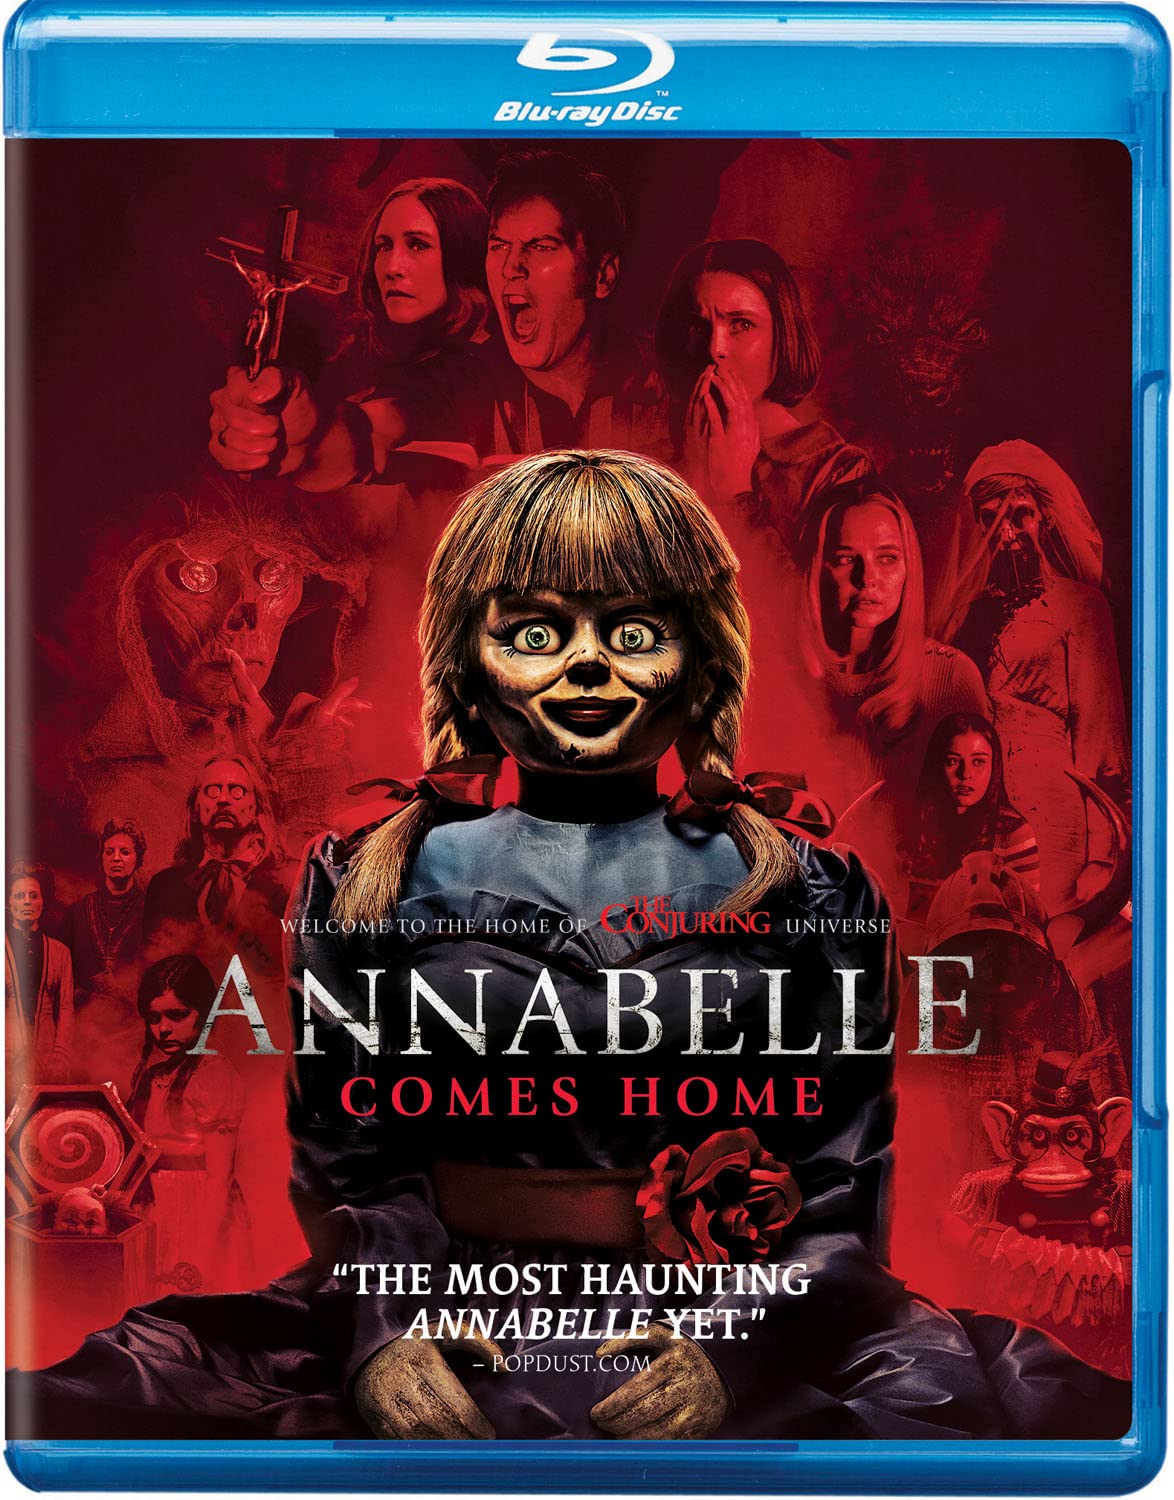 Annabelle Comes Home - Darkside Records